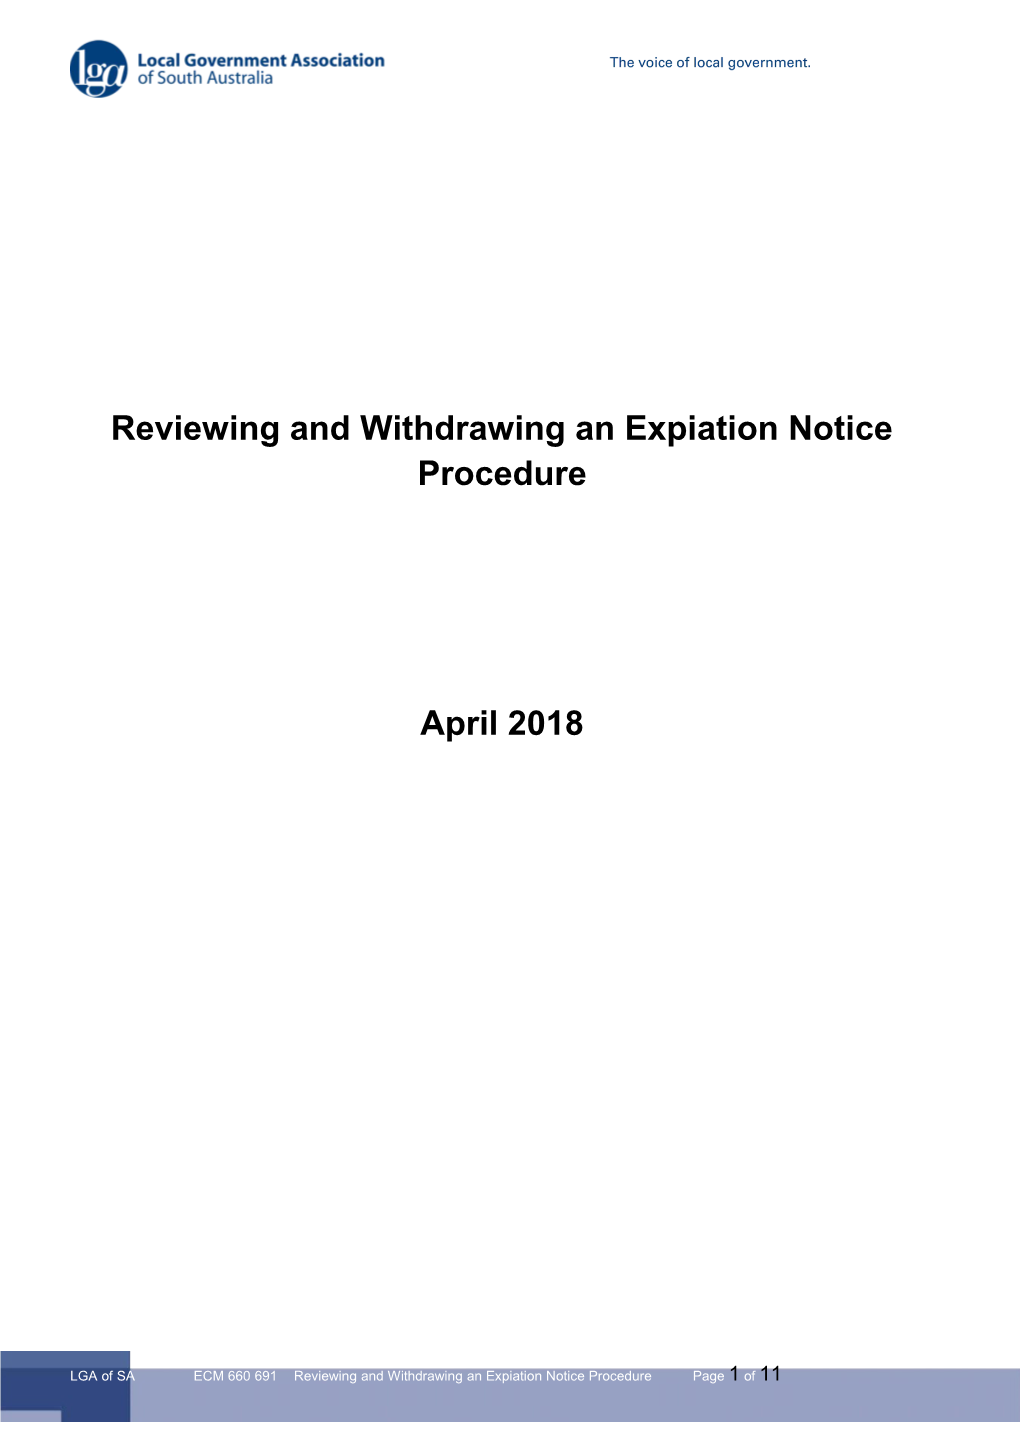 Reviewing and Withdrawing an Expiation Notice Procedure